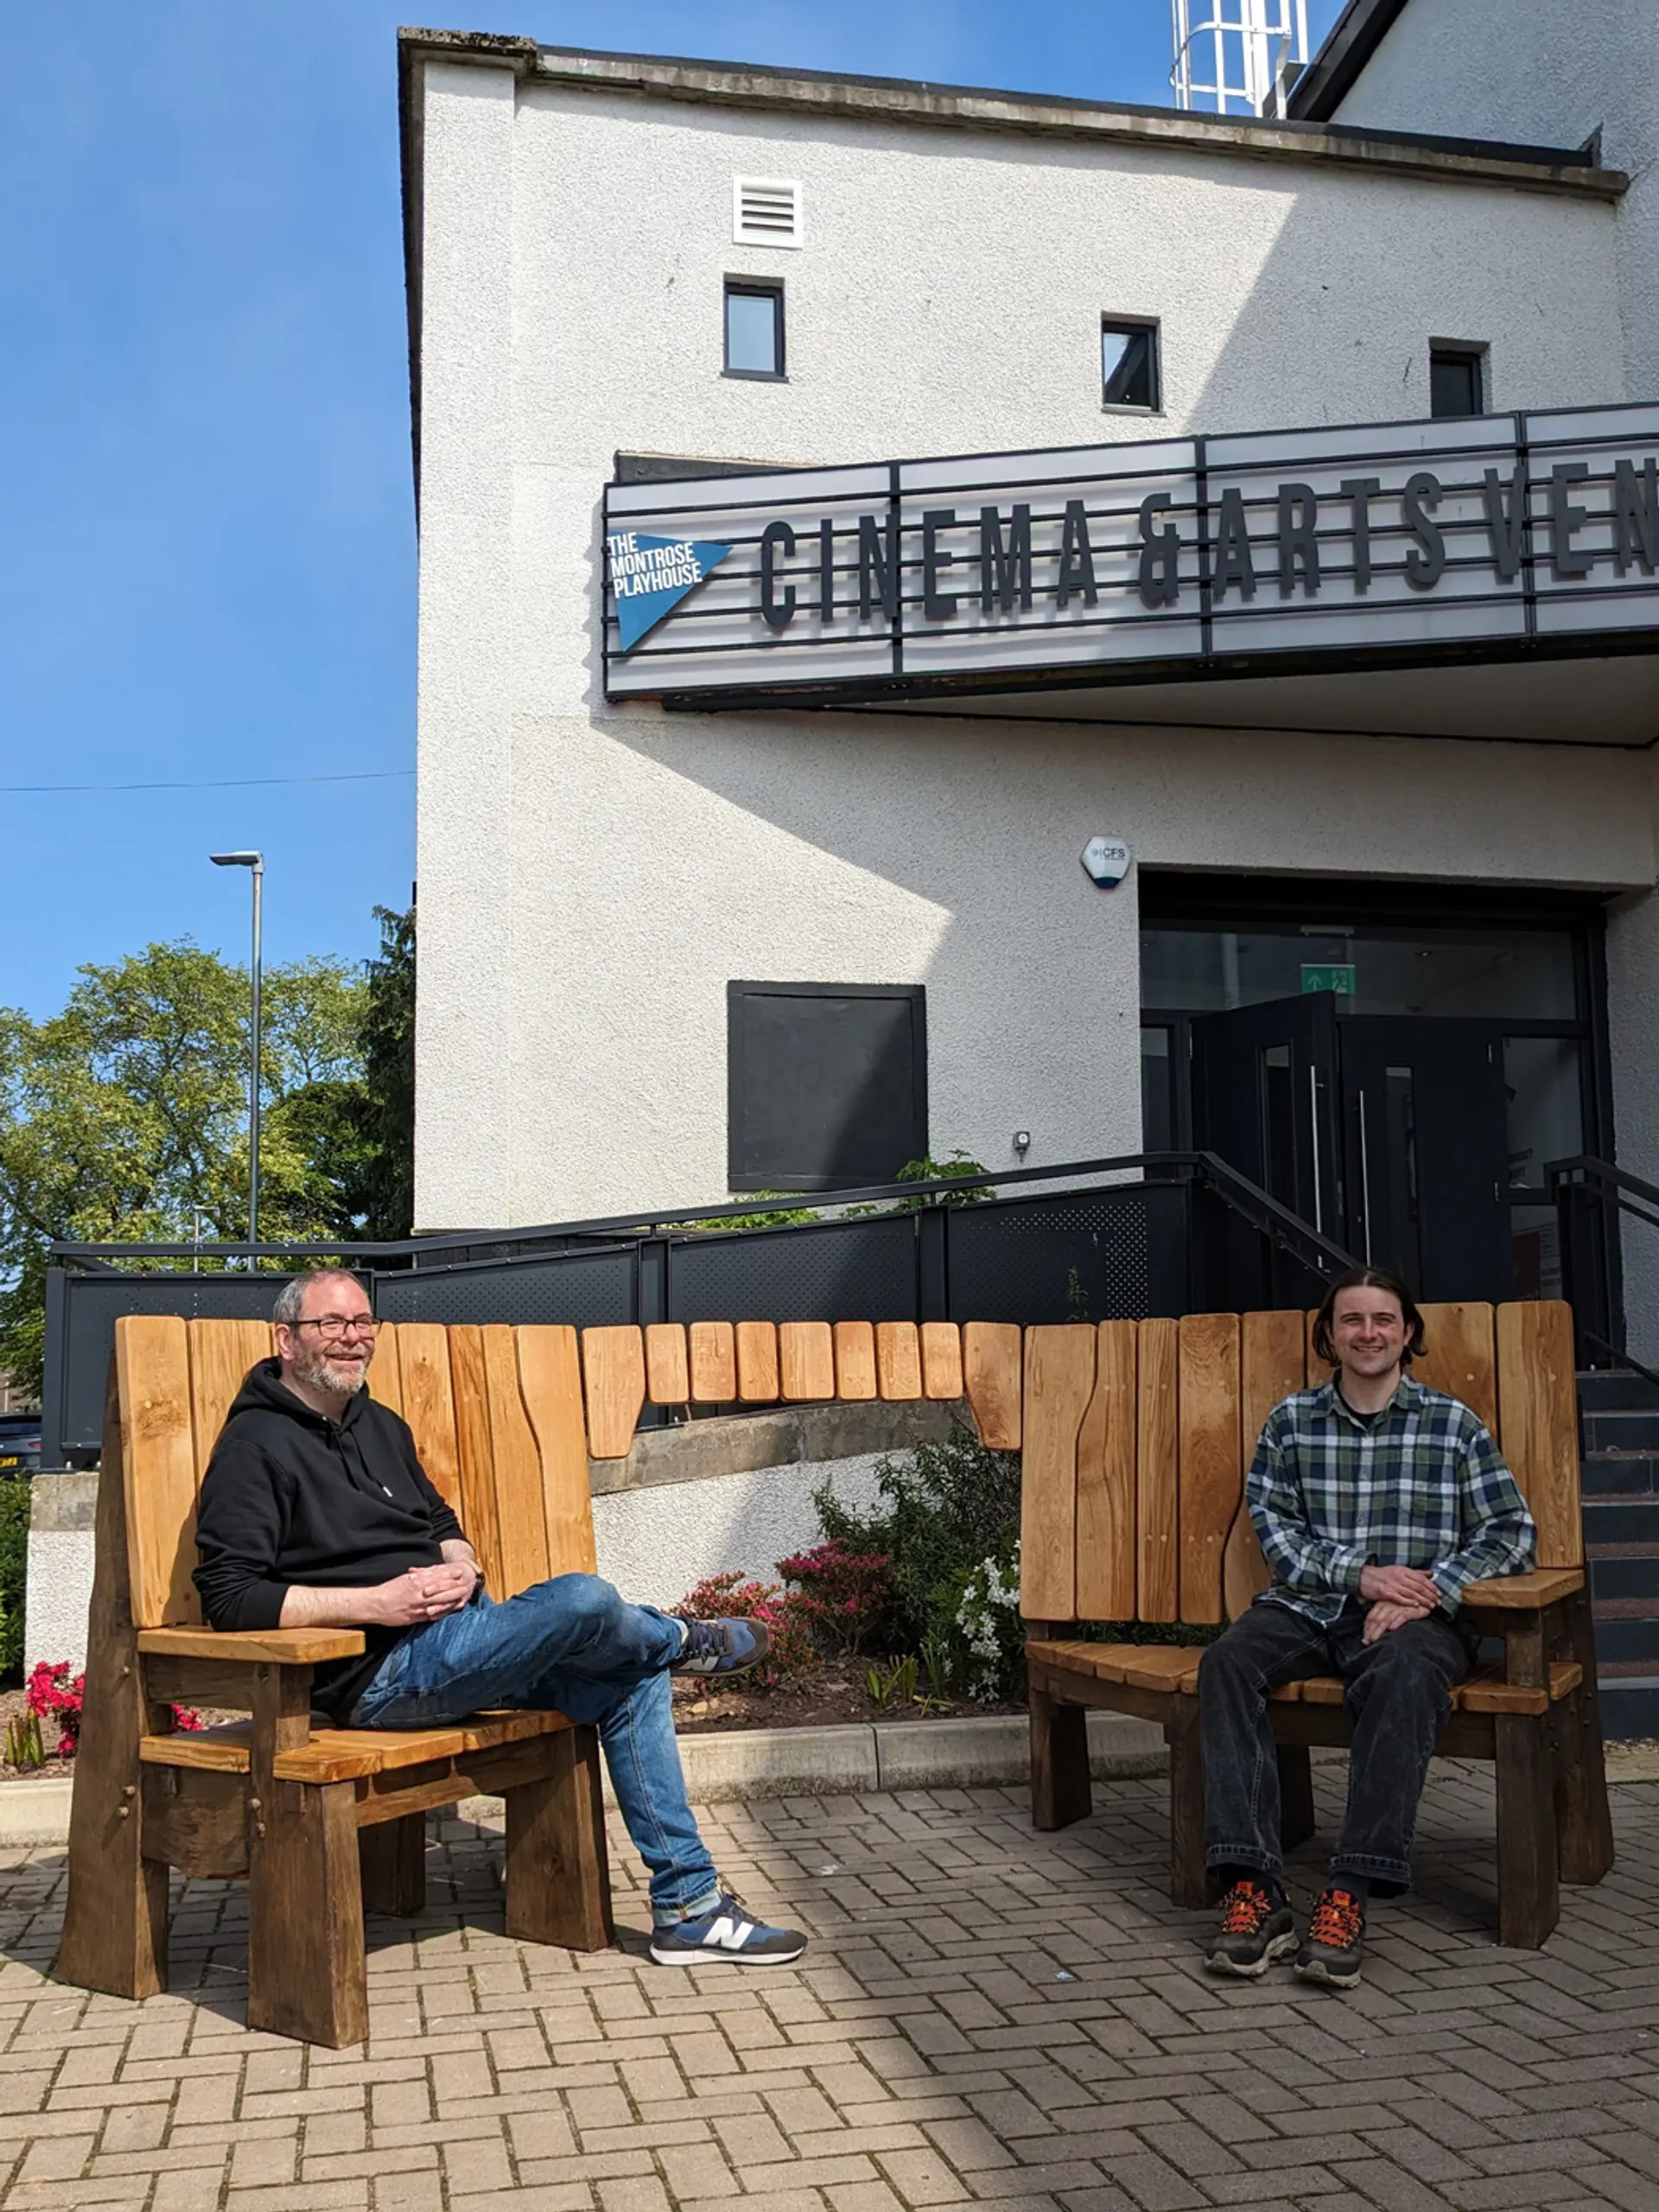 A sunny blue sky behind a white building that says, ‘Cinema and Arts Venue’. There is a solid wooden bench, two men sit at opposite ends of the bench, both are smiling at the camera.